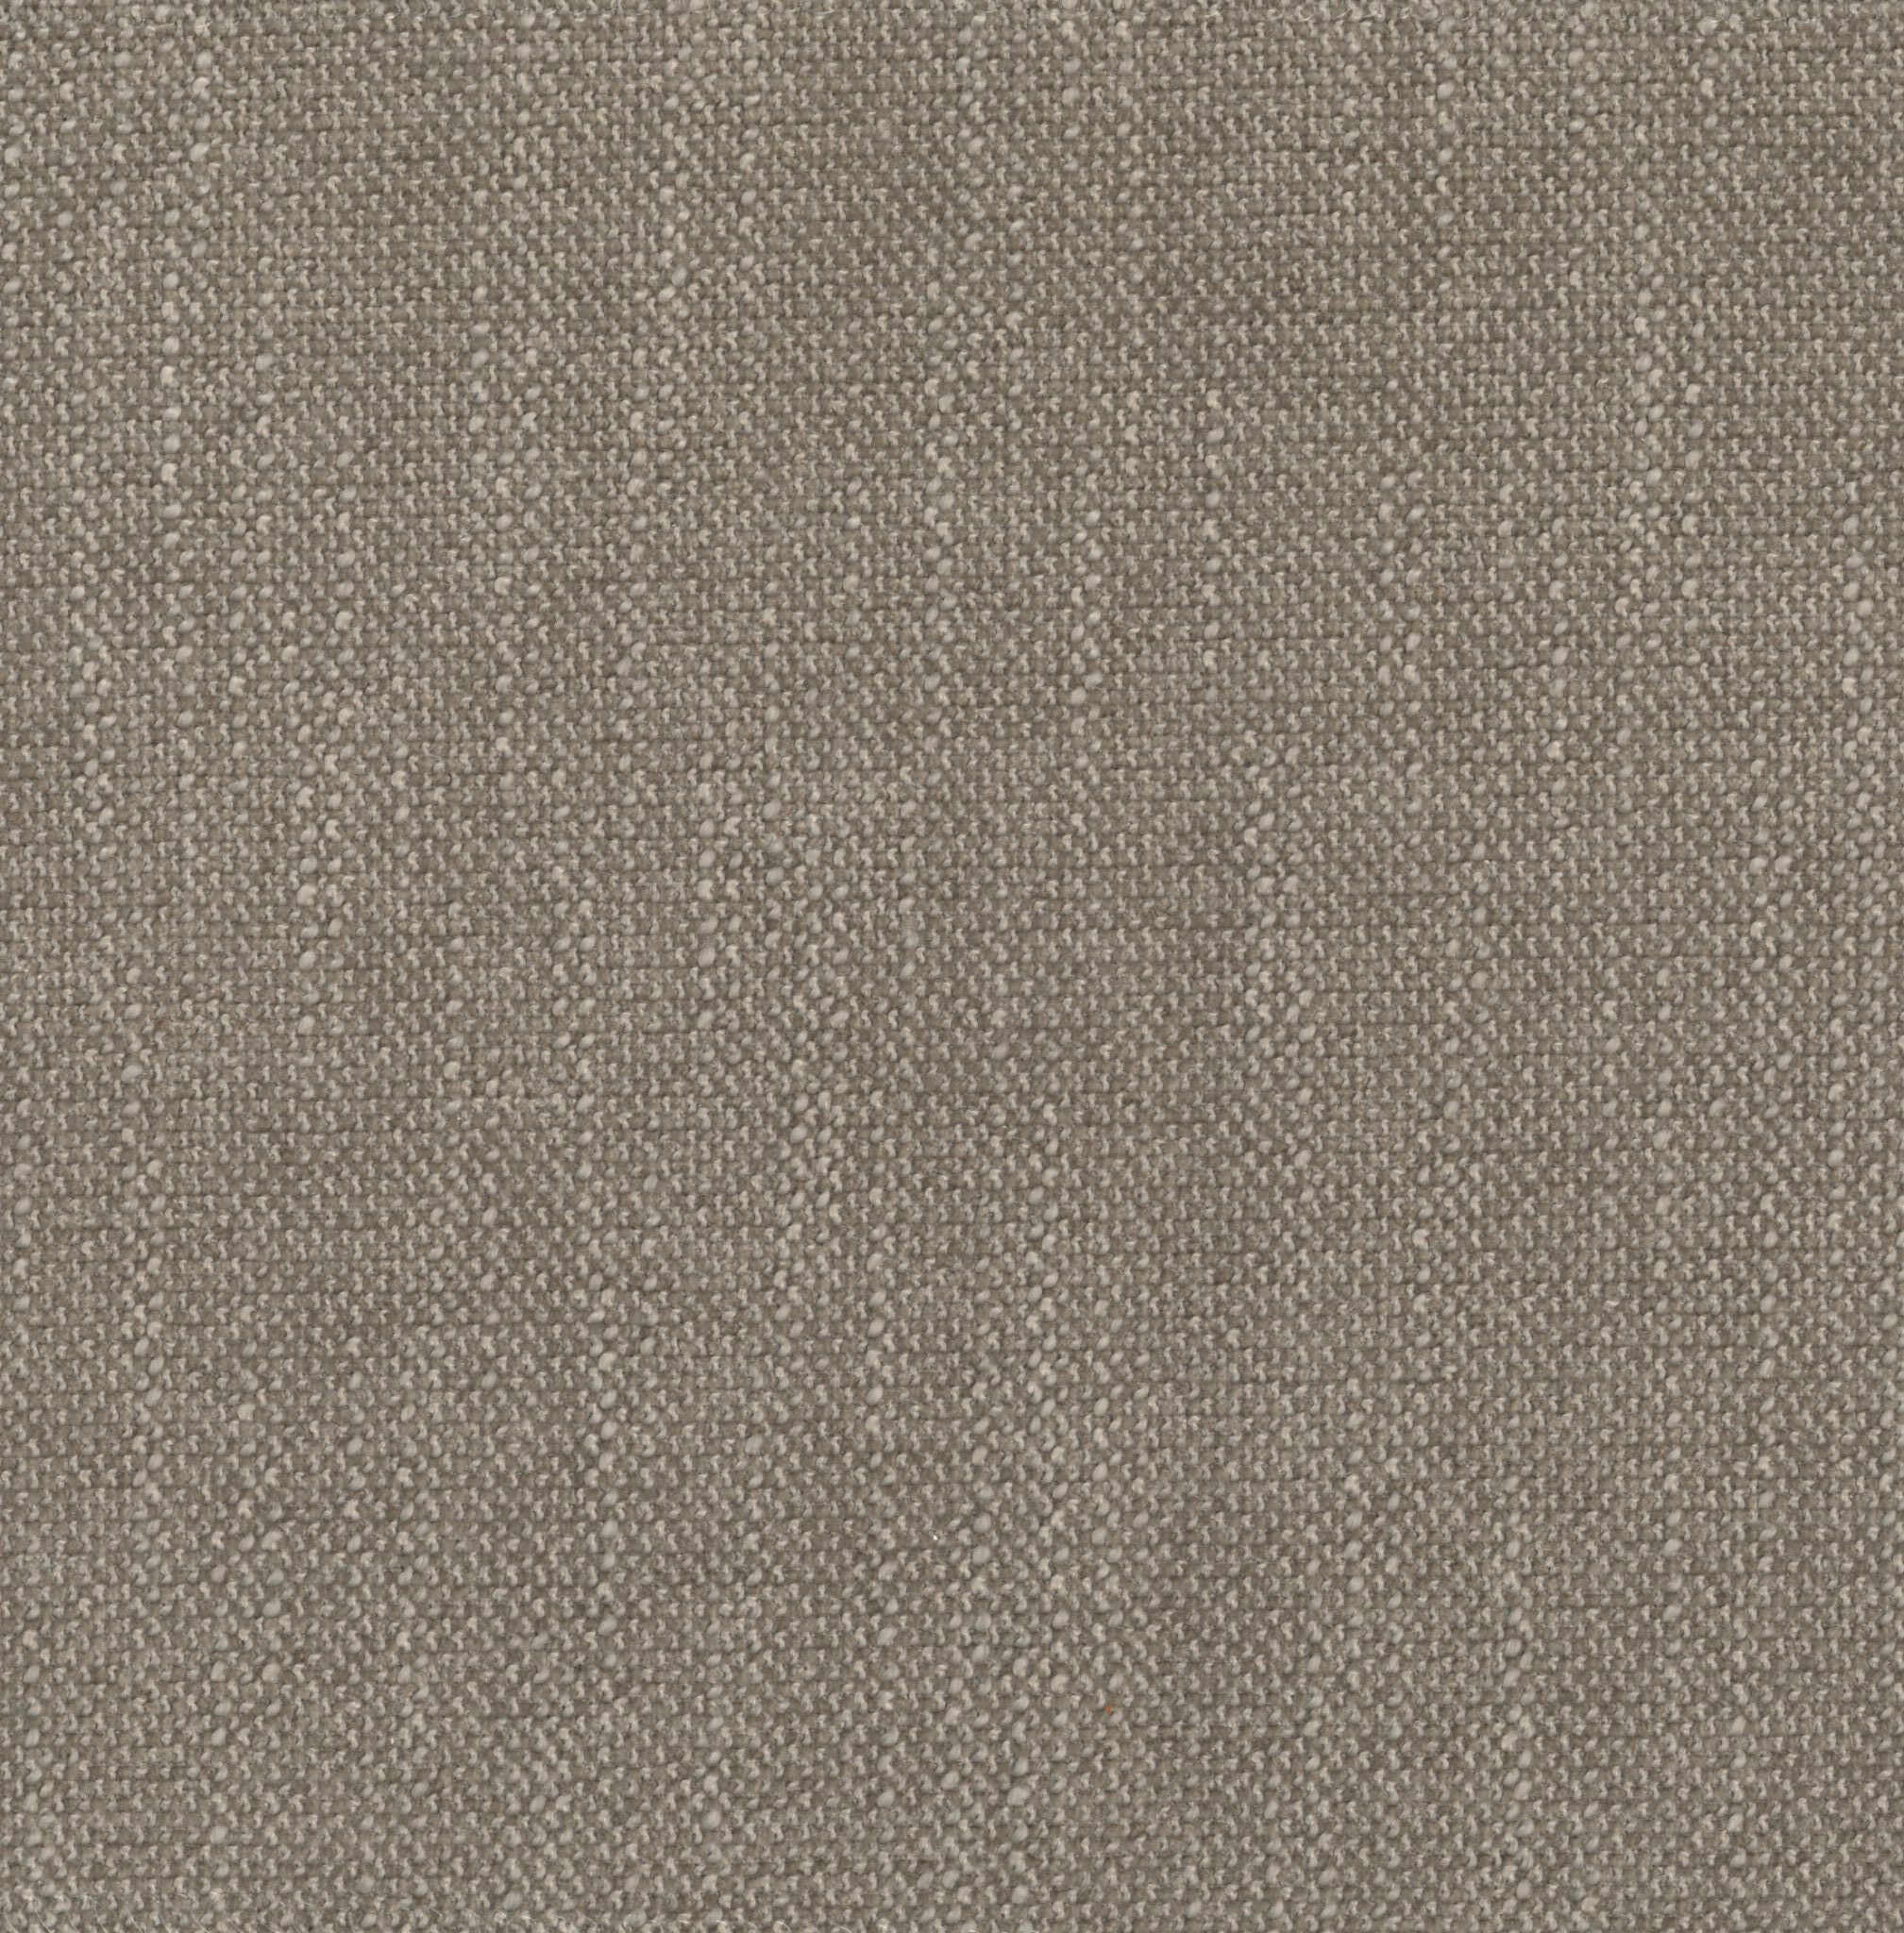 Walden Natural Fabric Swatch